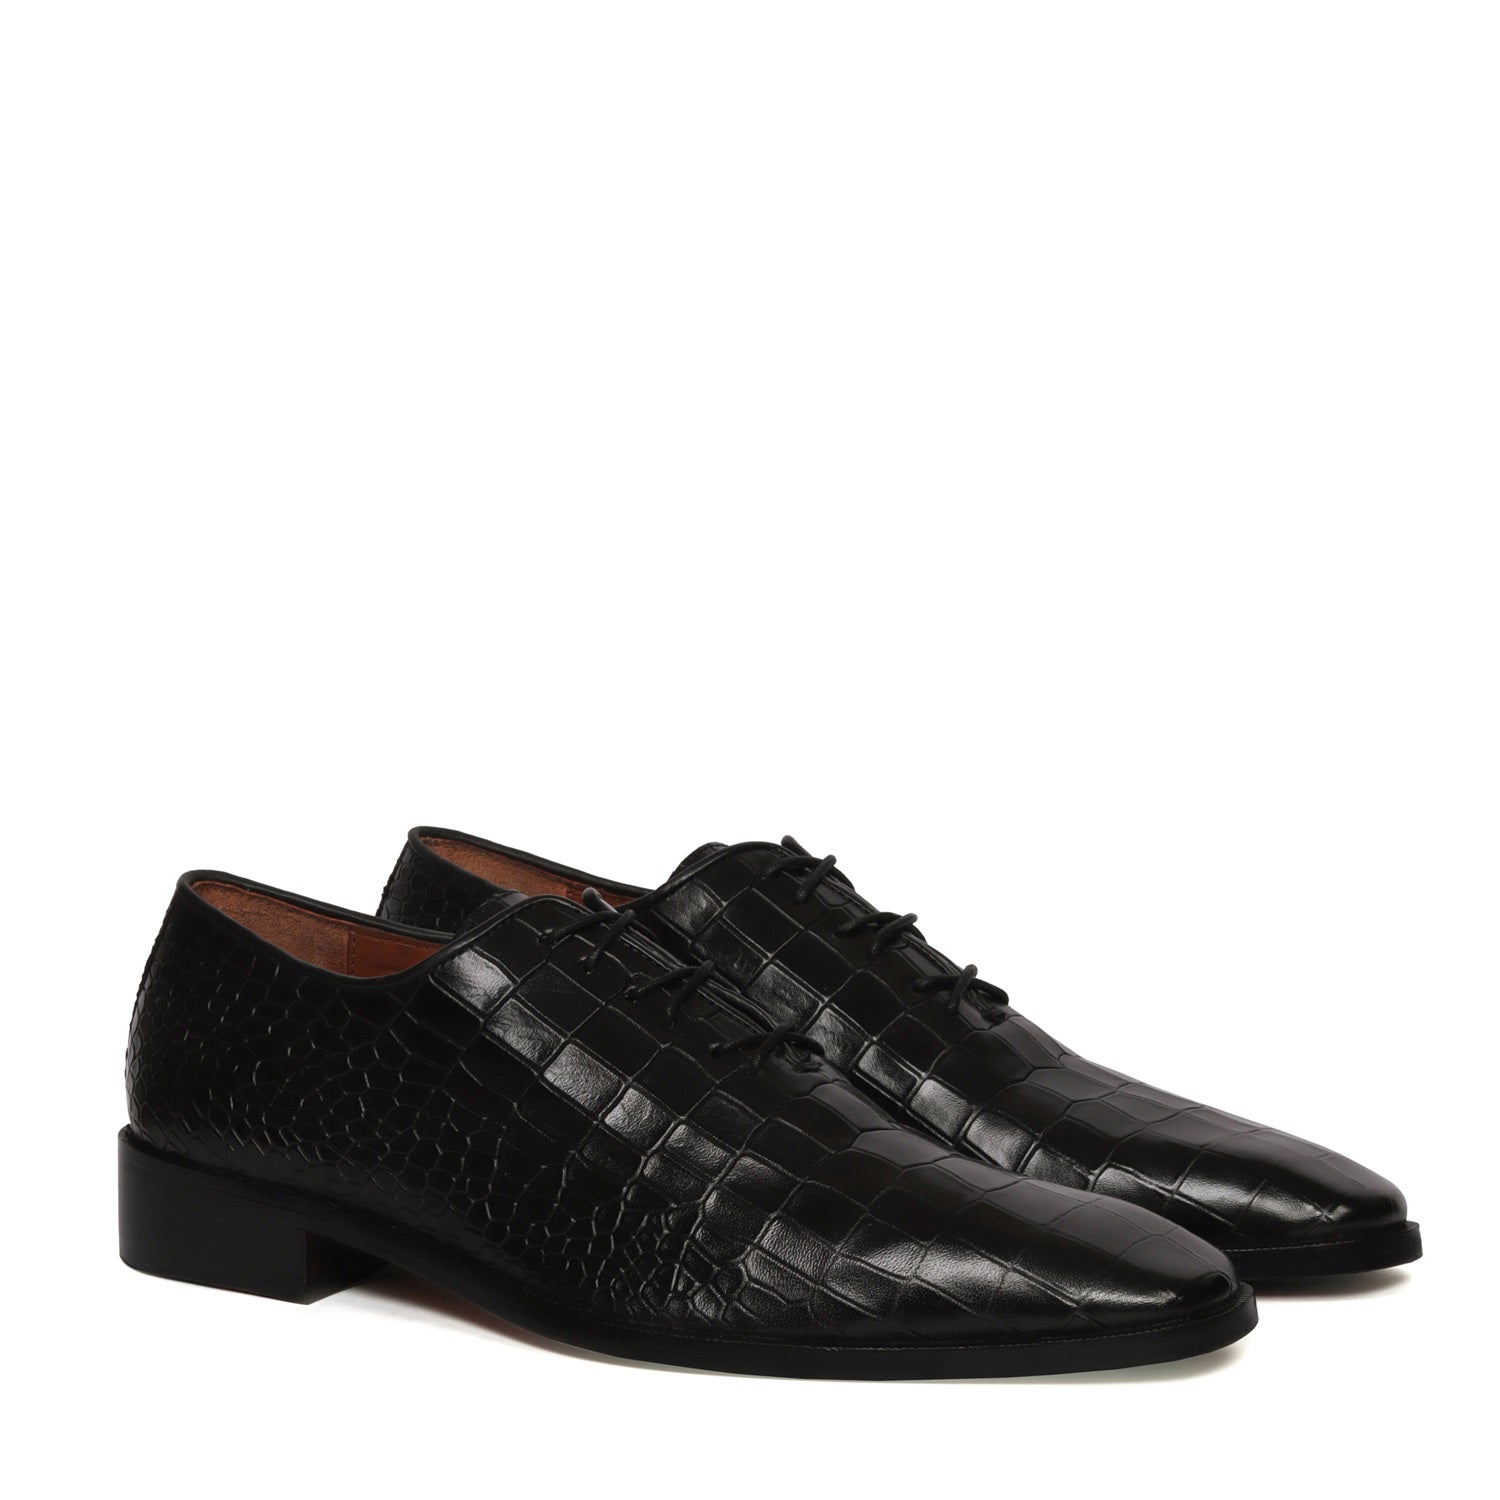 Black Slant Toe Oxford Shoes with Full Croco Textured Leather (Designed For T-20 Wolrd cup 2023 Team India )